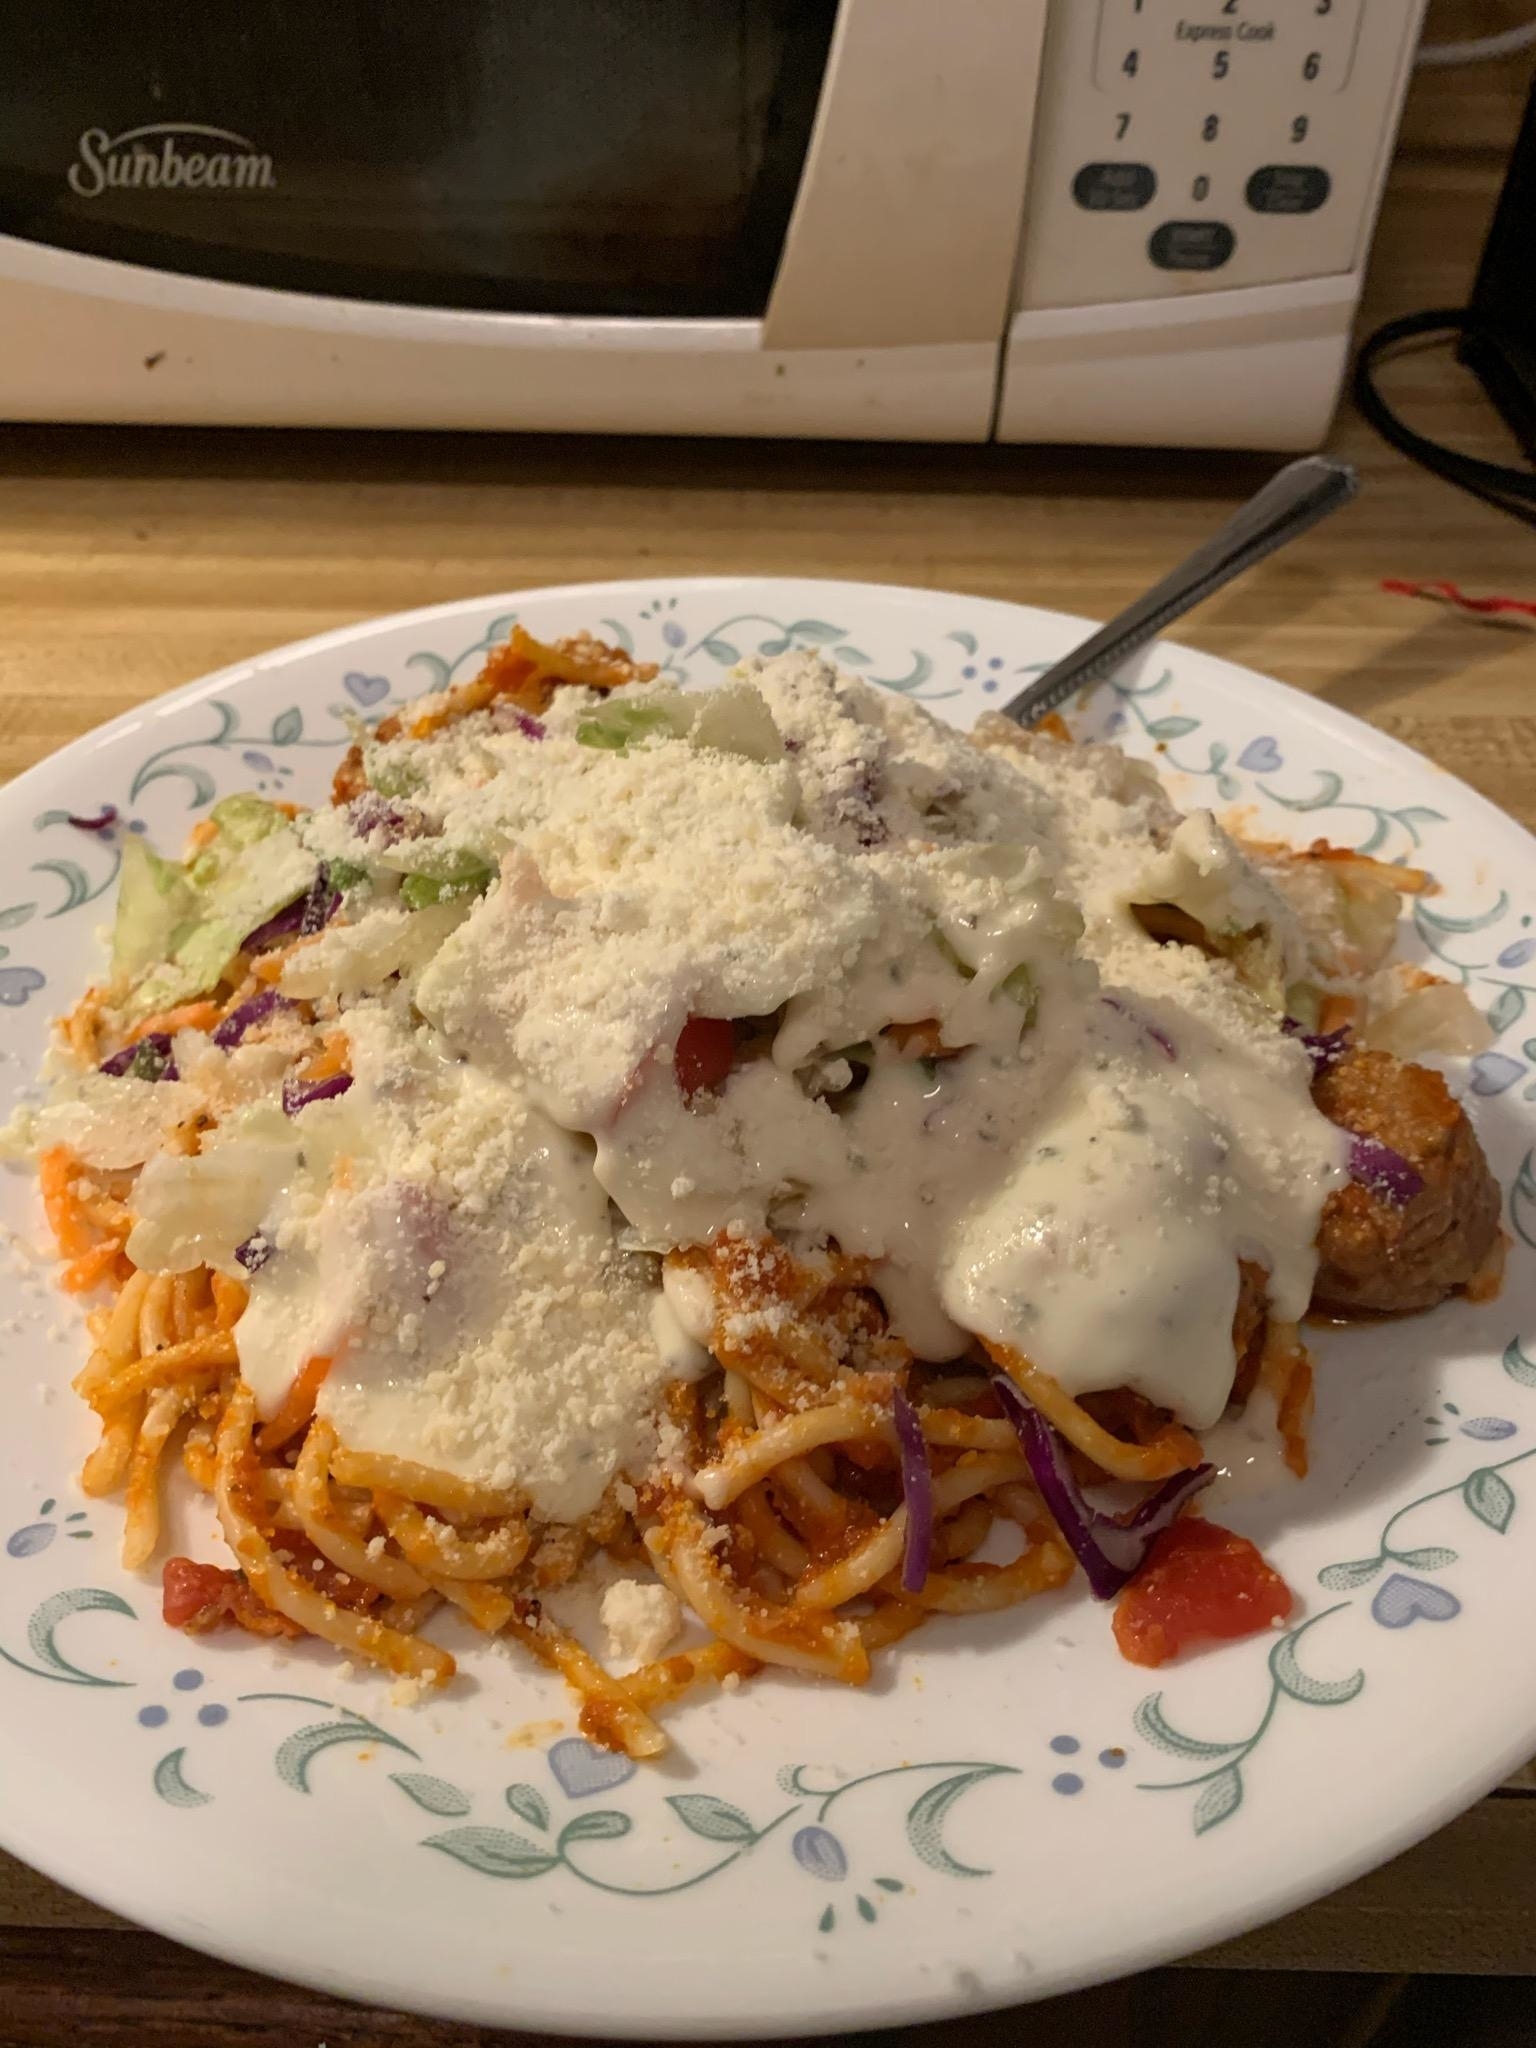 A plate of spaghetti with ranch topped with shredded cheese